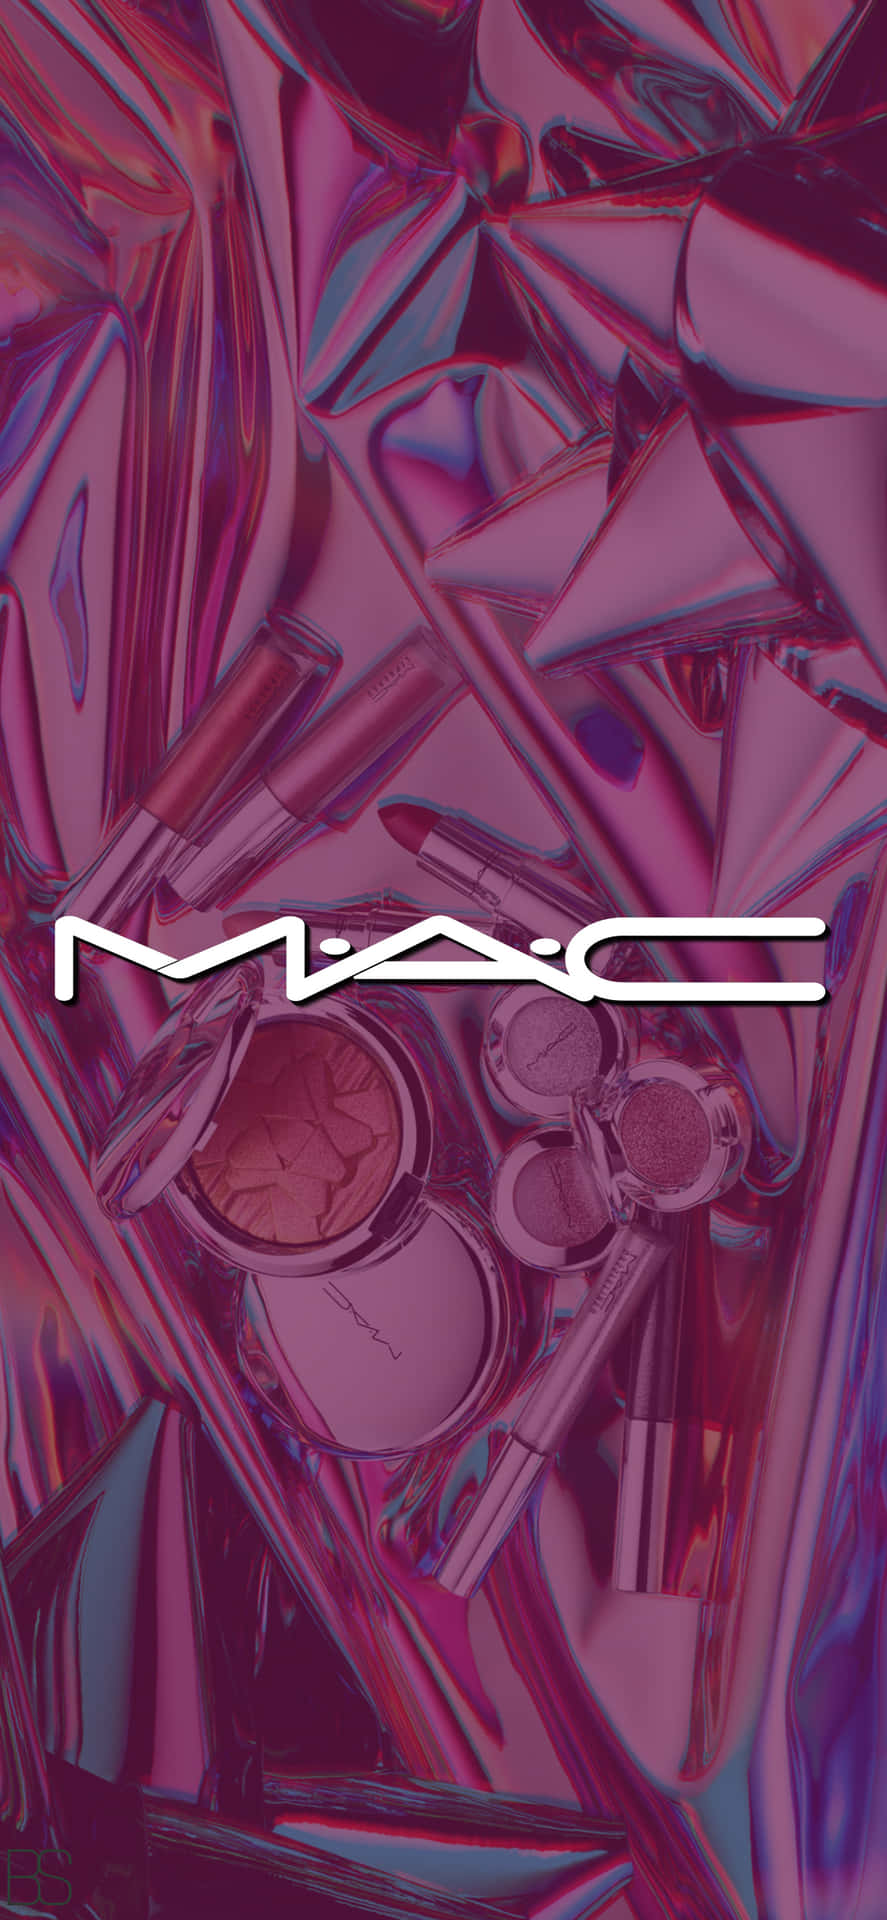 Enhance your unique beauty with MAC Cosmetics